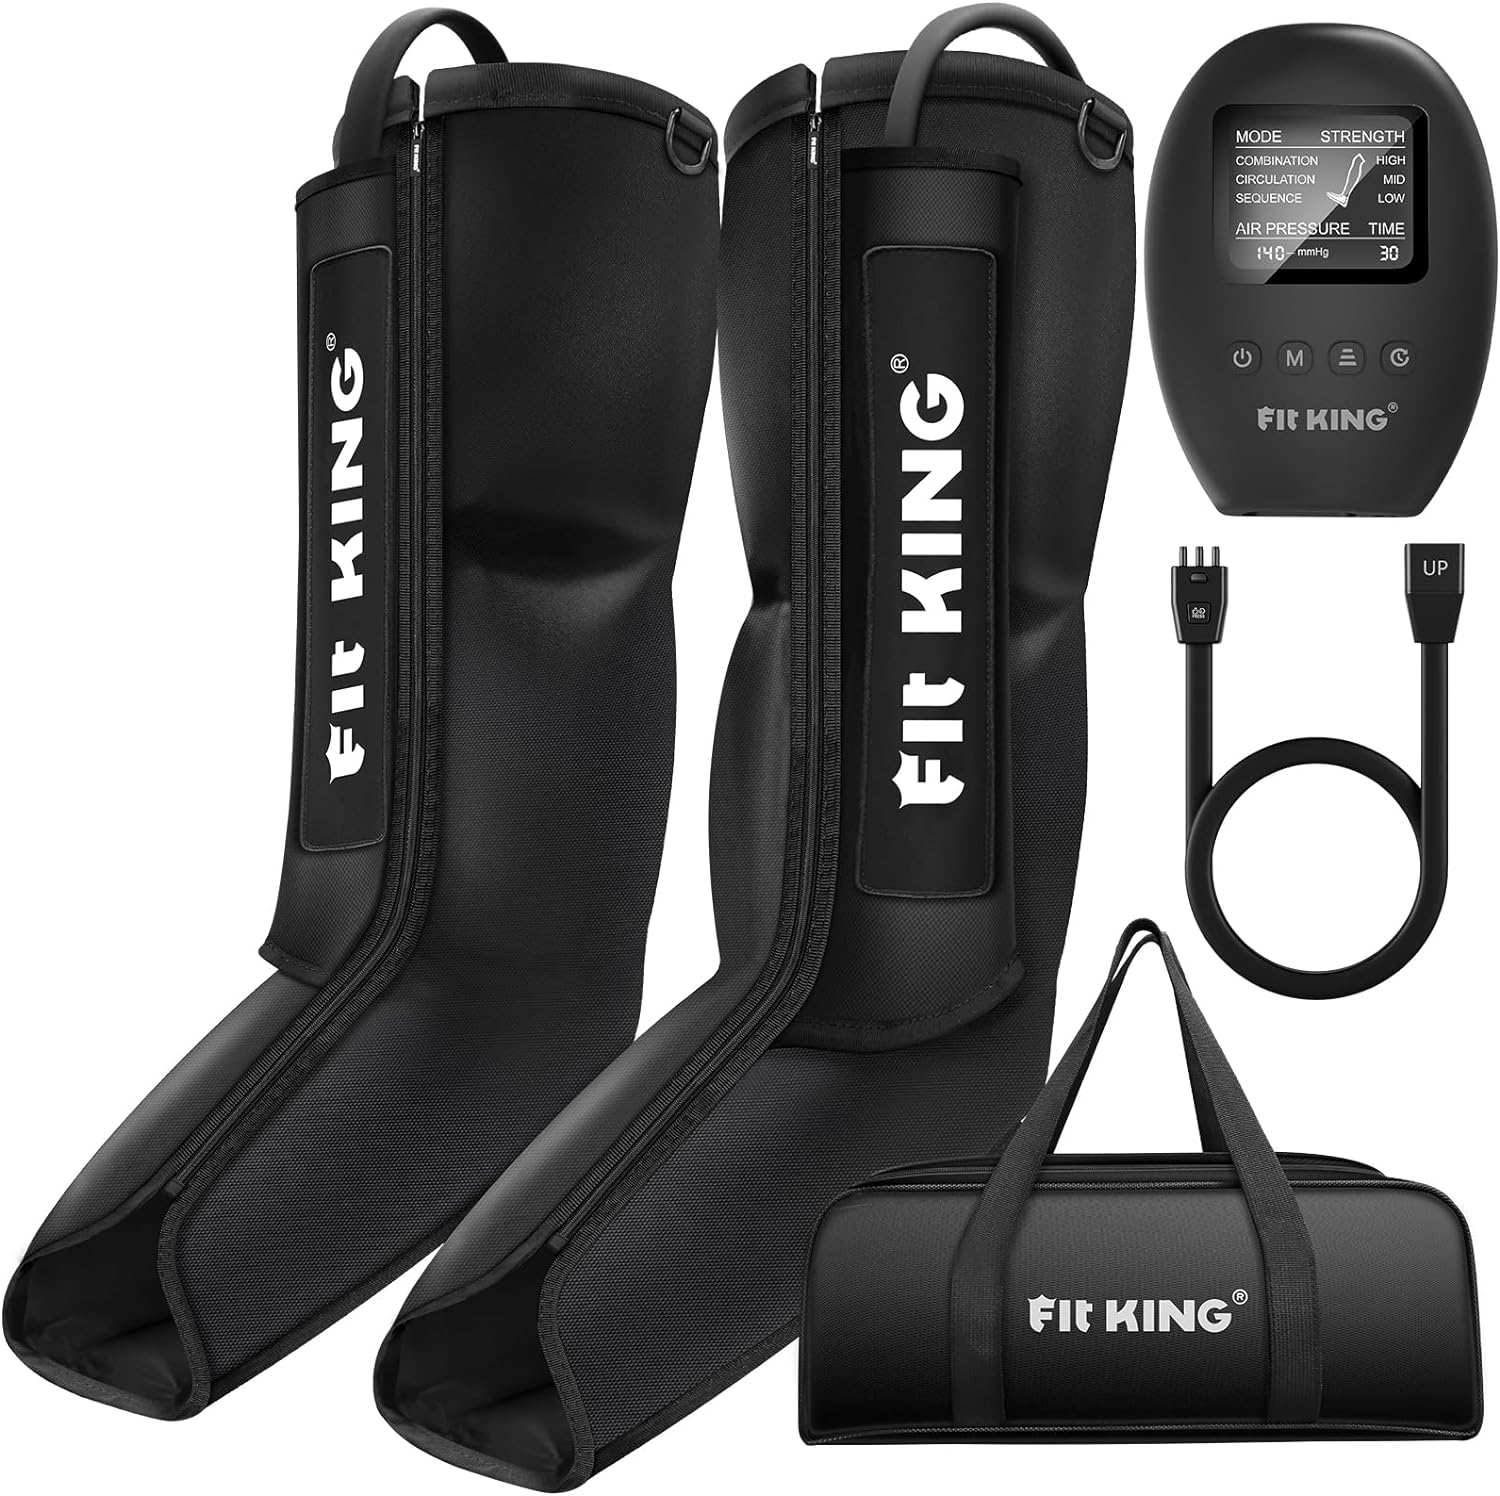 Time-Sensitive Deal: FIT KING Leg Compression Boots Massager for Foot and Calf Recovery - Upgraded Leg Massager at 39% off!